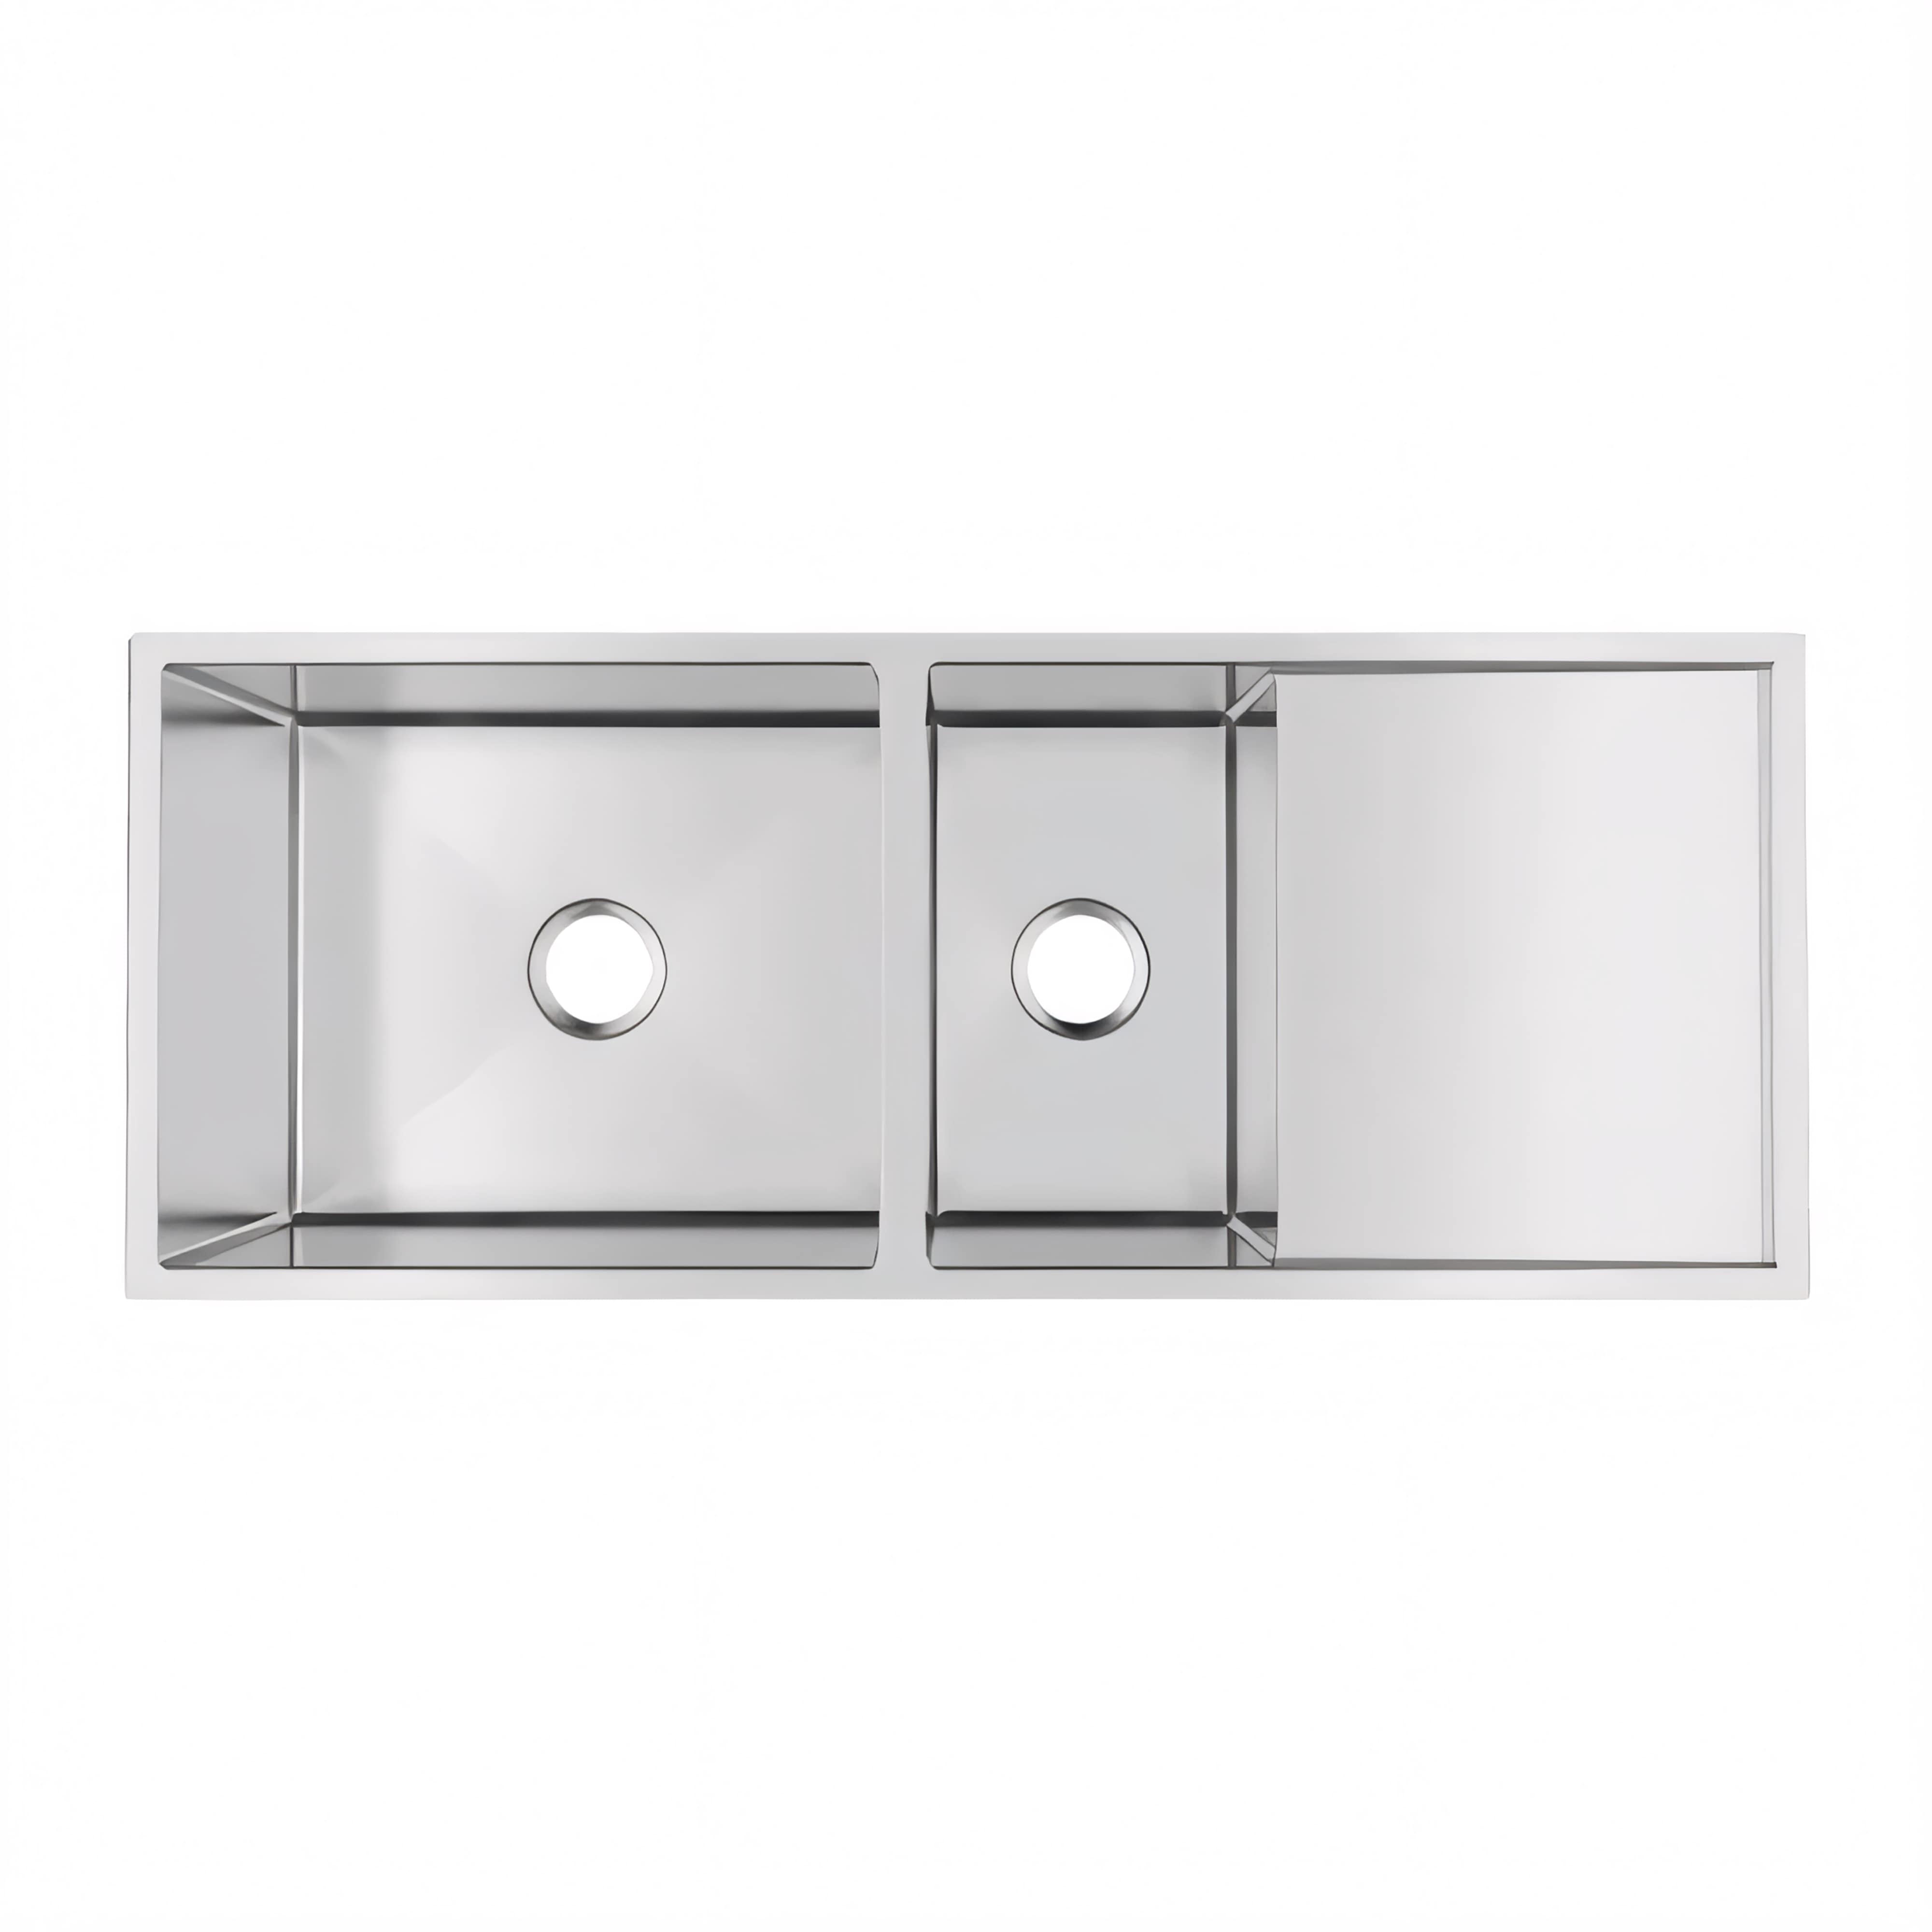 AQUAPERLA T304 UNDERMOUNT ONE AND HALF DOUBLE BOWL SINK STAINLESS STEEL 1160MM